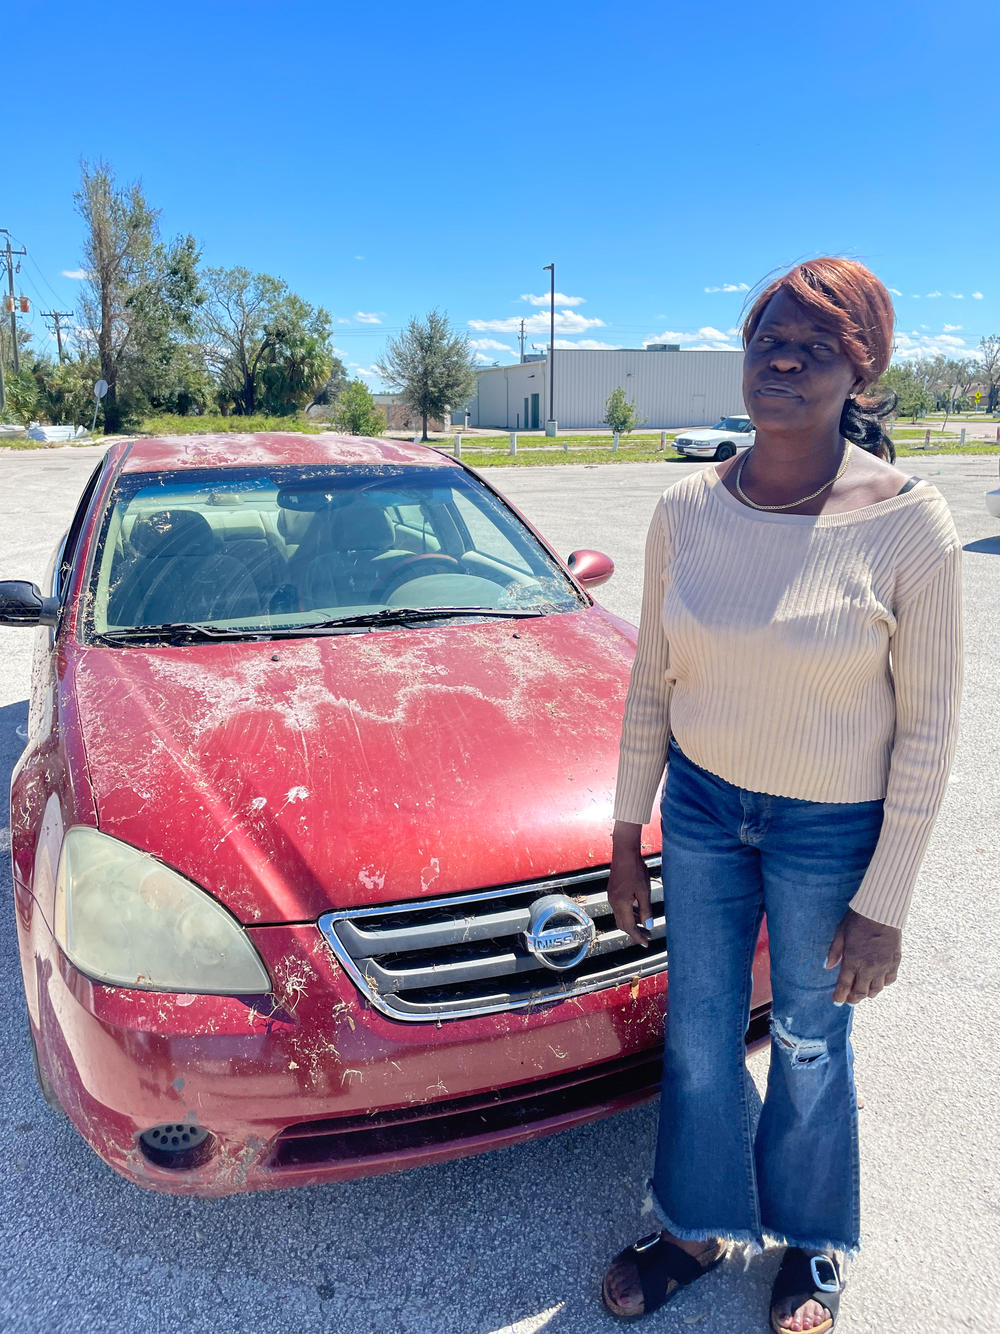 Virginia Hatcher Washington is seen next to the car she was sleeping in after Hurricane Ian tore through Arcadia, Fla. The Peace River was still flooding local highways several days after Ian.